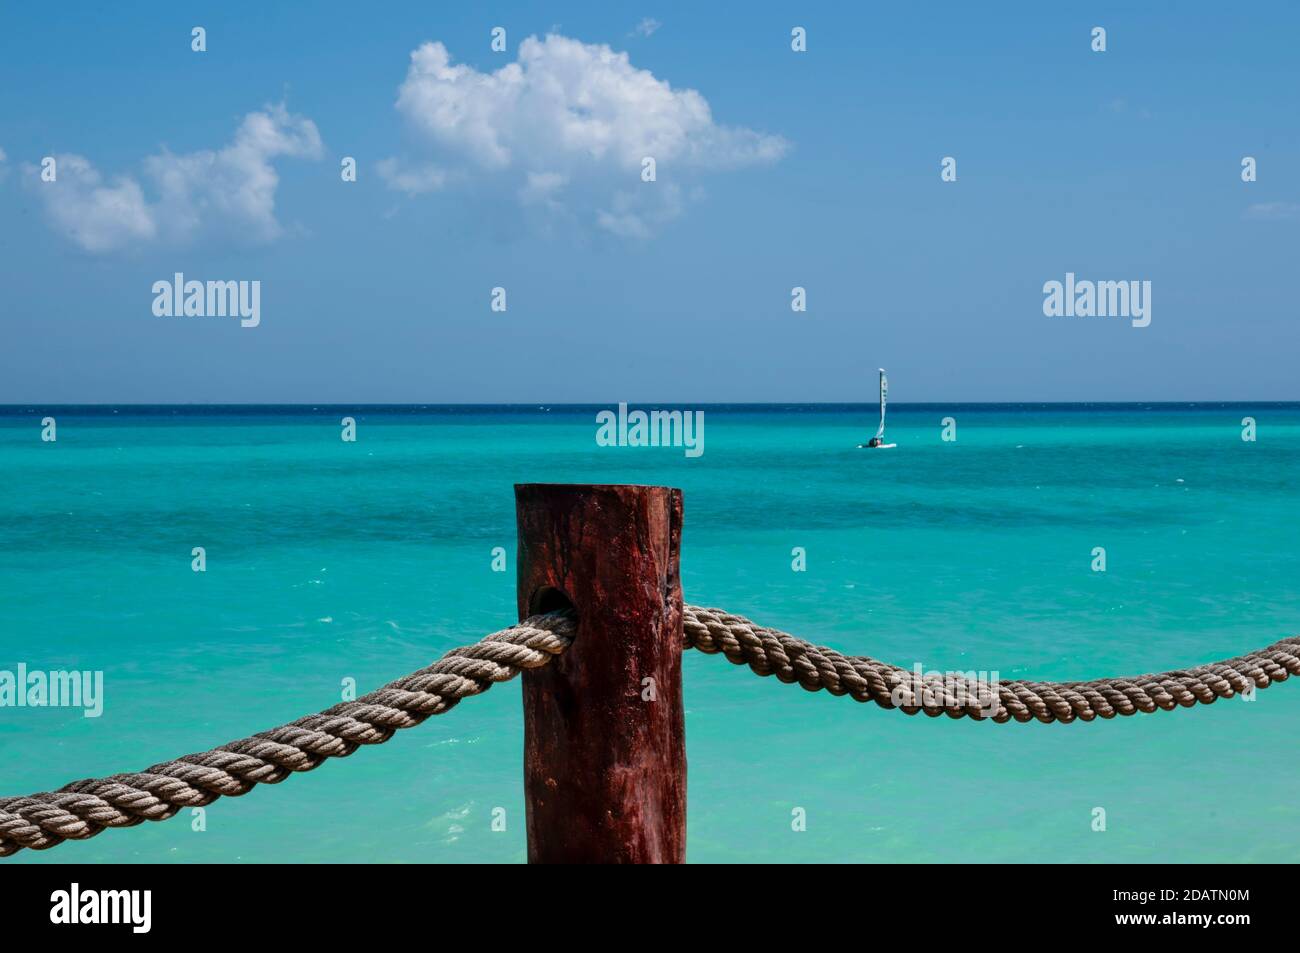 Rustic rope with a wooden support pole. In the background the Caribbean sea with a small sailboat, the blue sky and white clouds. Mexican Caribbean Stock Photo